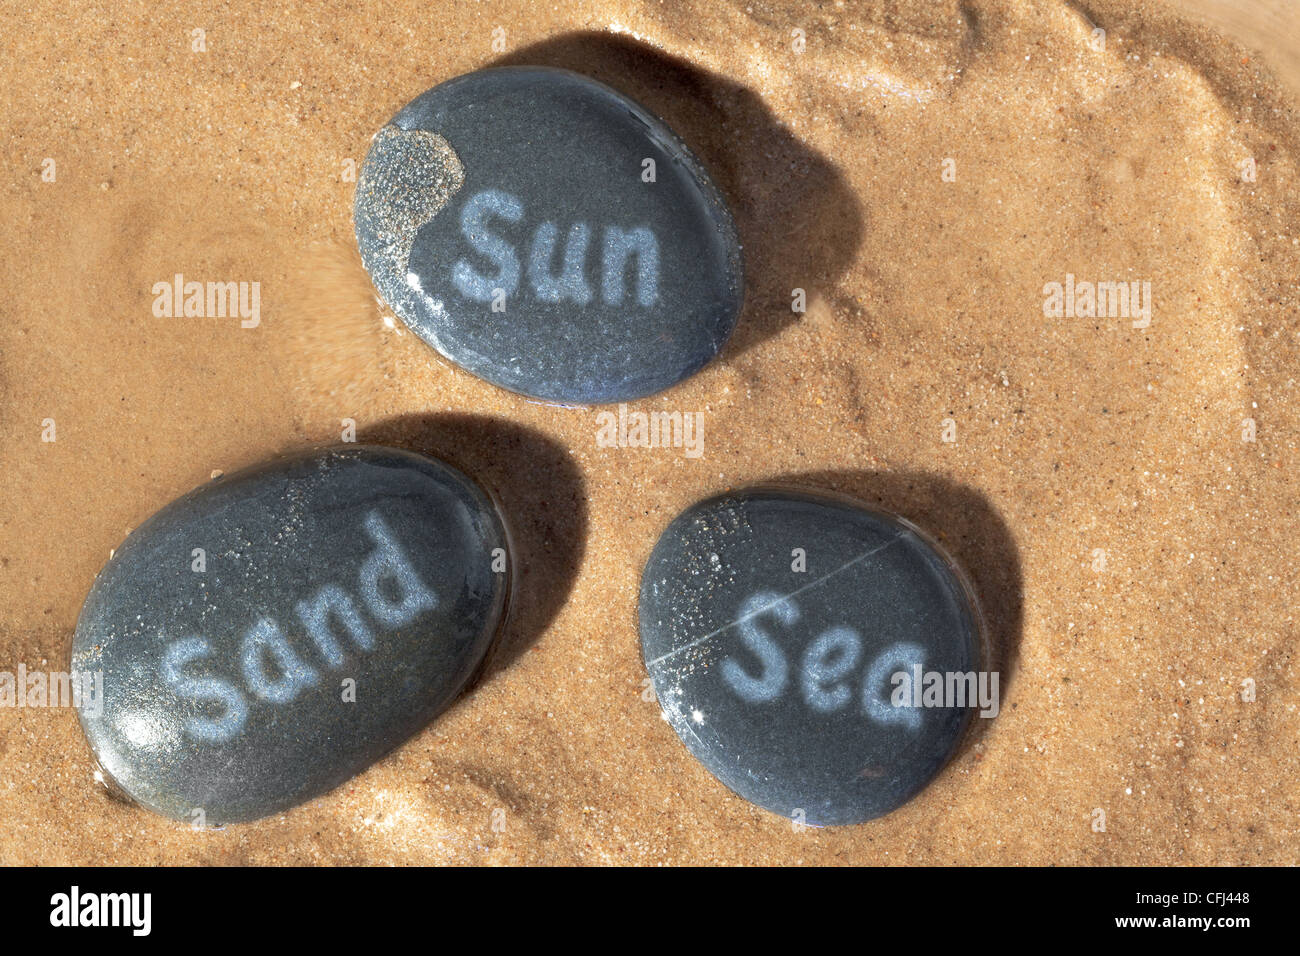 Concept photo of Sun Sand and Sea written on wet pebbles on the beach with the sunshine casting deep shadows. Stock Photo